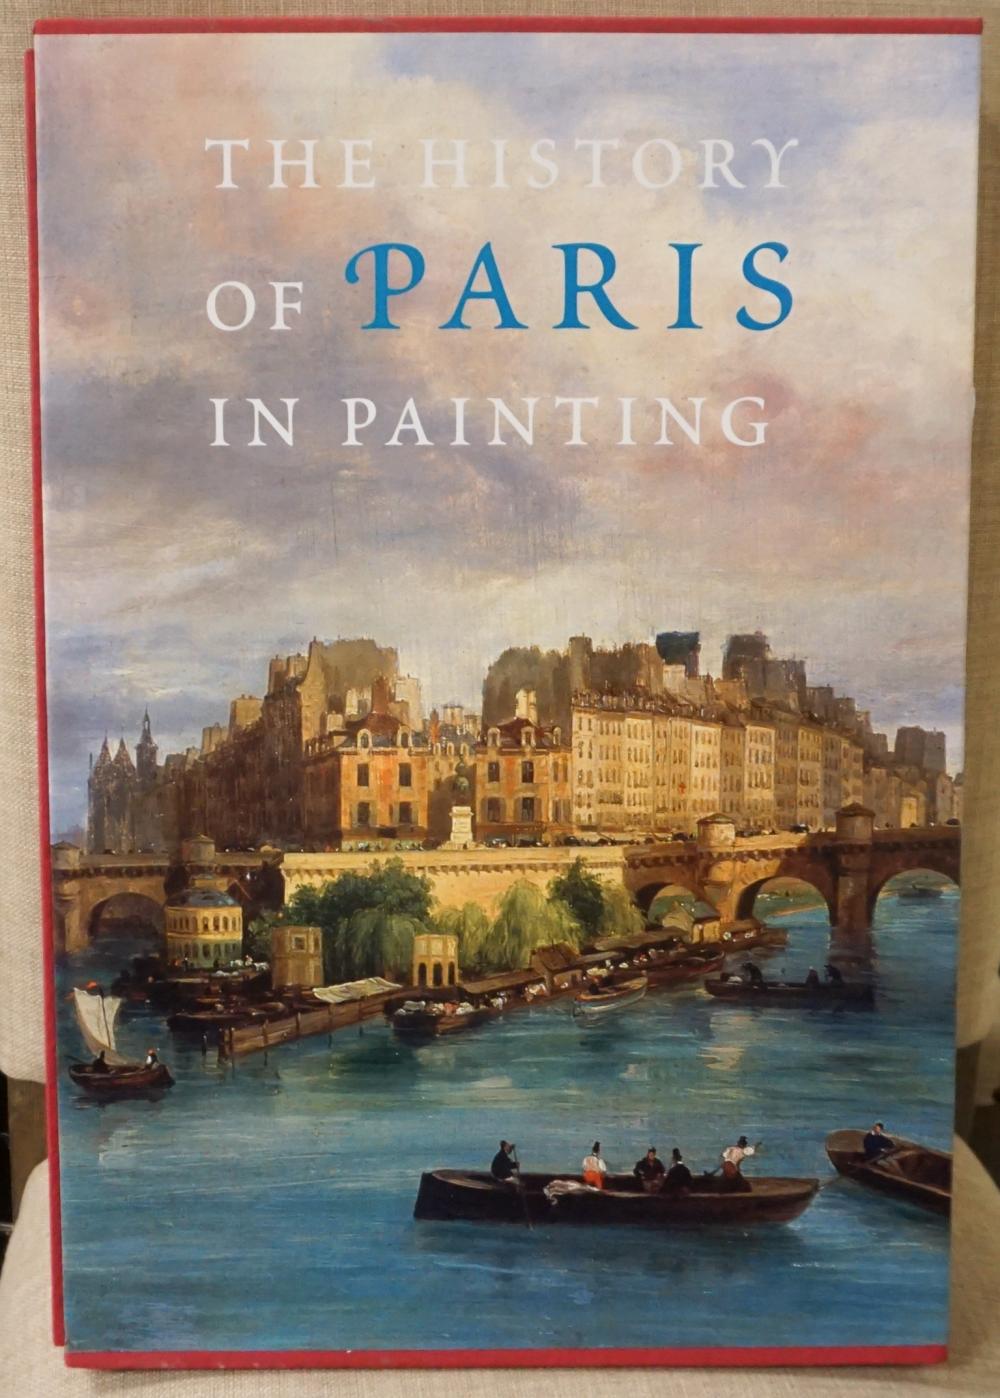 THE HISTORY OF PARIS IN PAINTINGS,